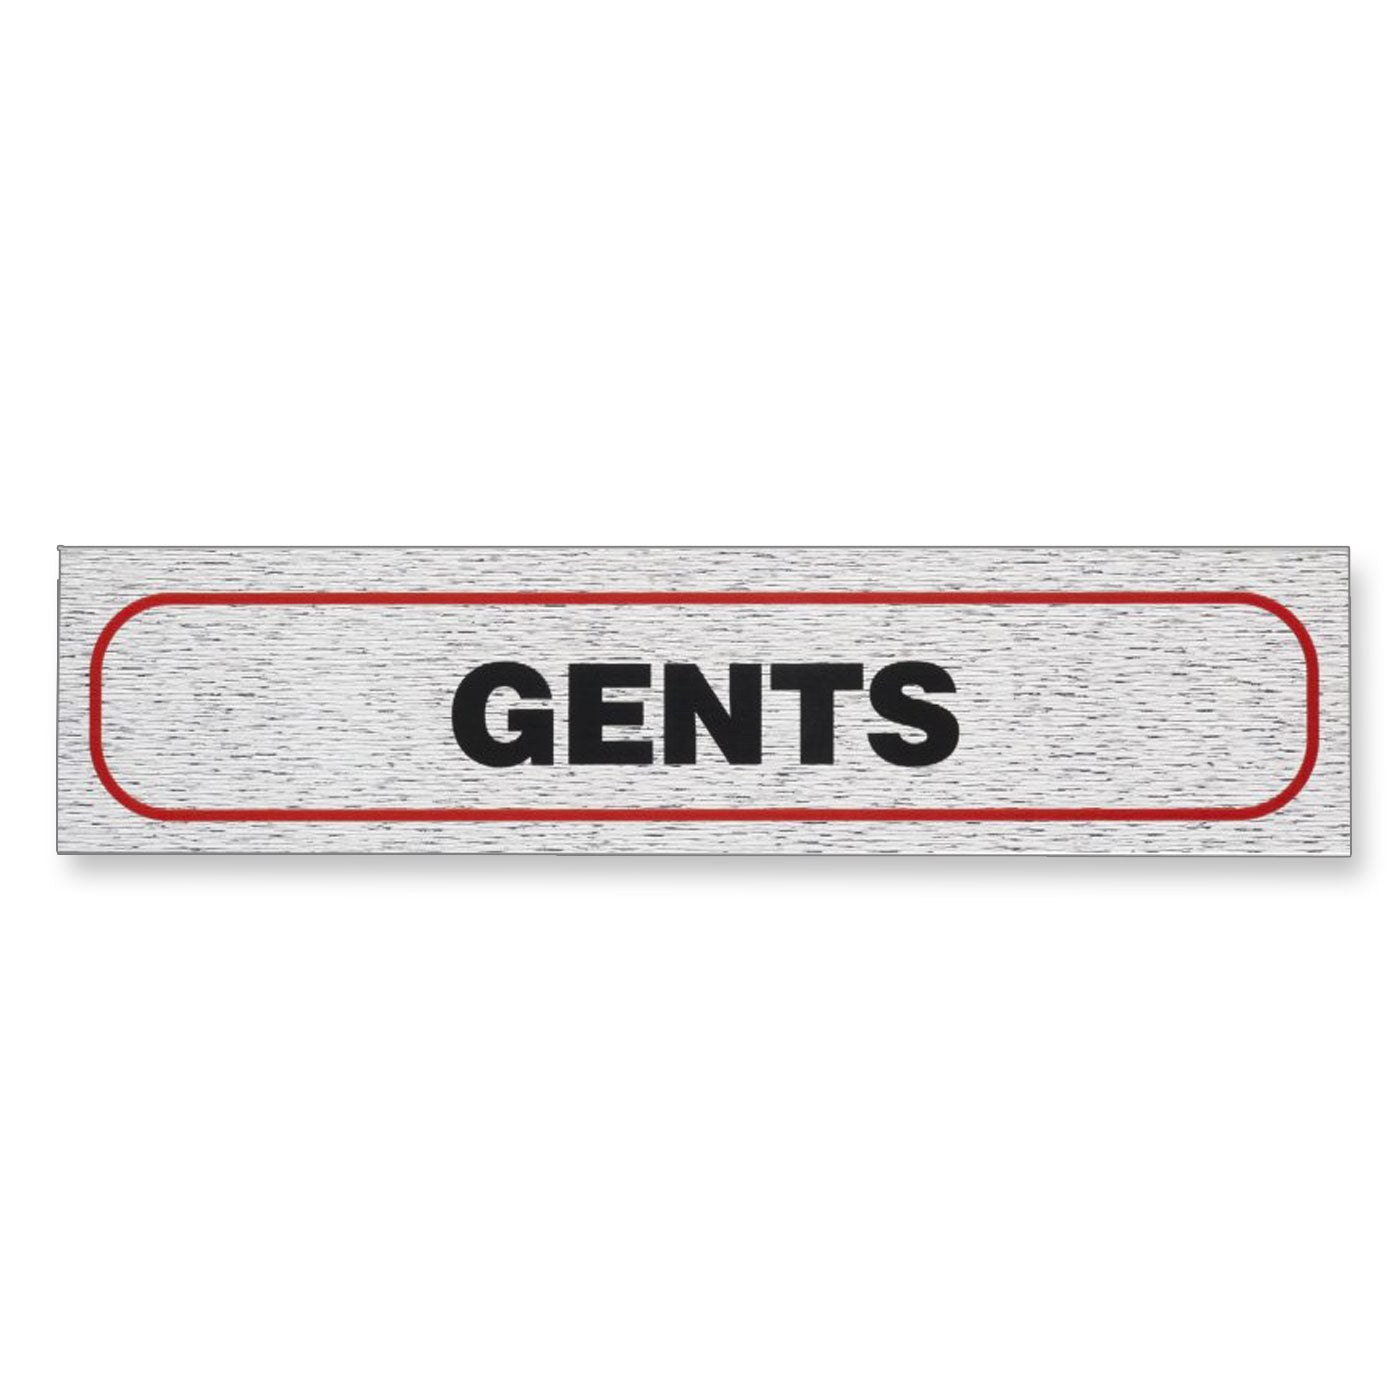 Information Sign "GENTS" 17 x 4 cm [Self-Adhesive]